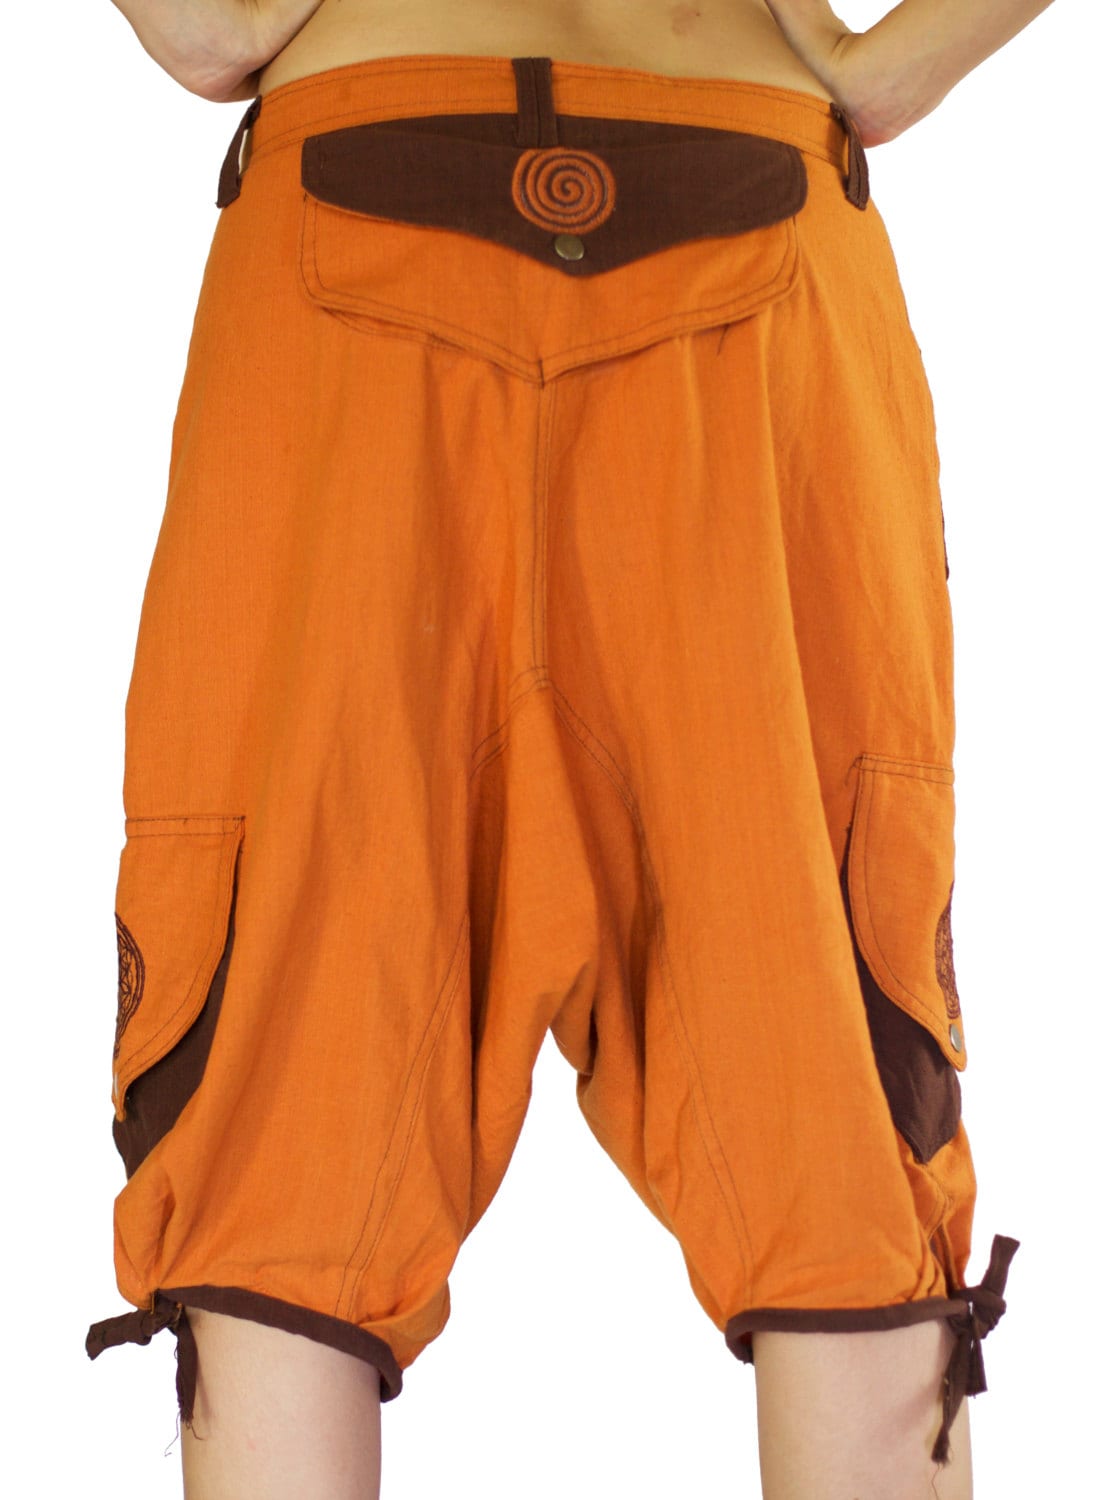 Flower of Life Hippie Pant - 8 pockets, 4 with hock&loop, 2 with clip - any size available clamdiggers made after order